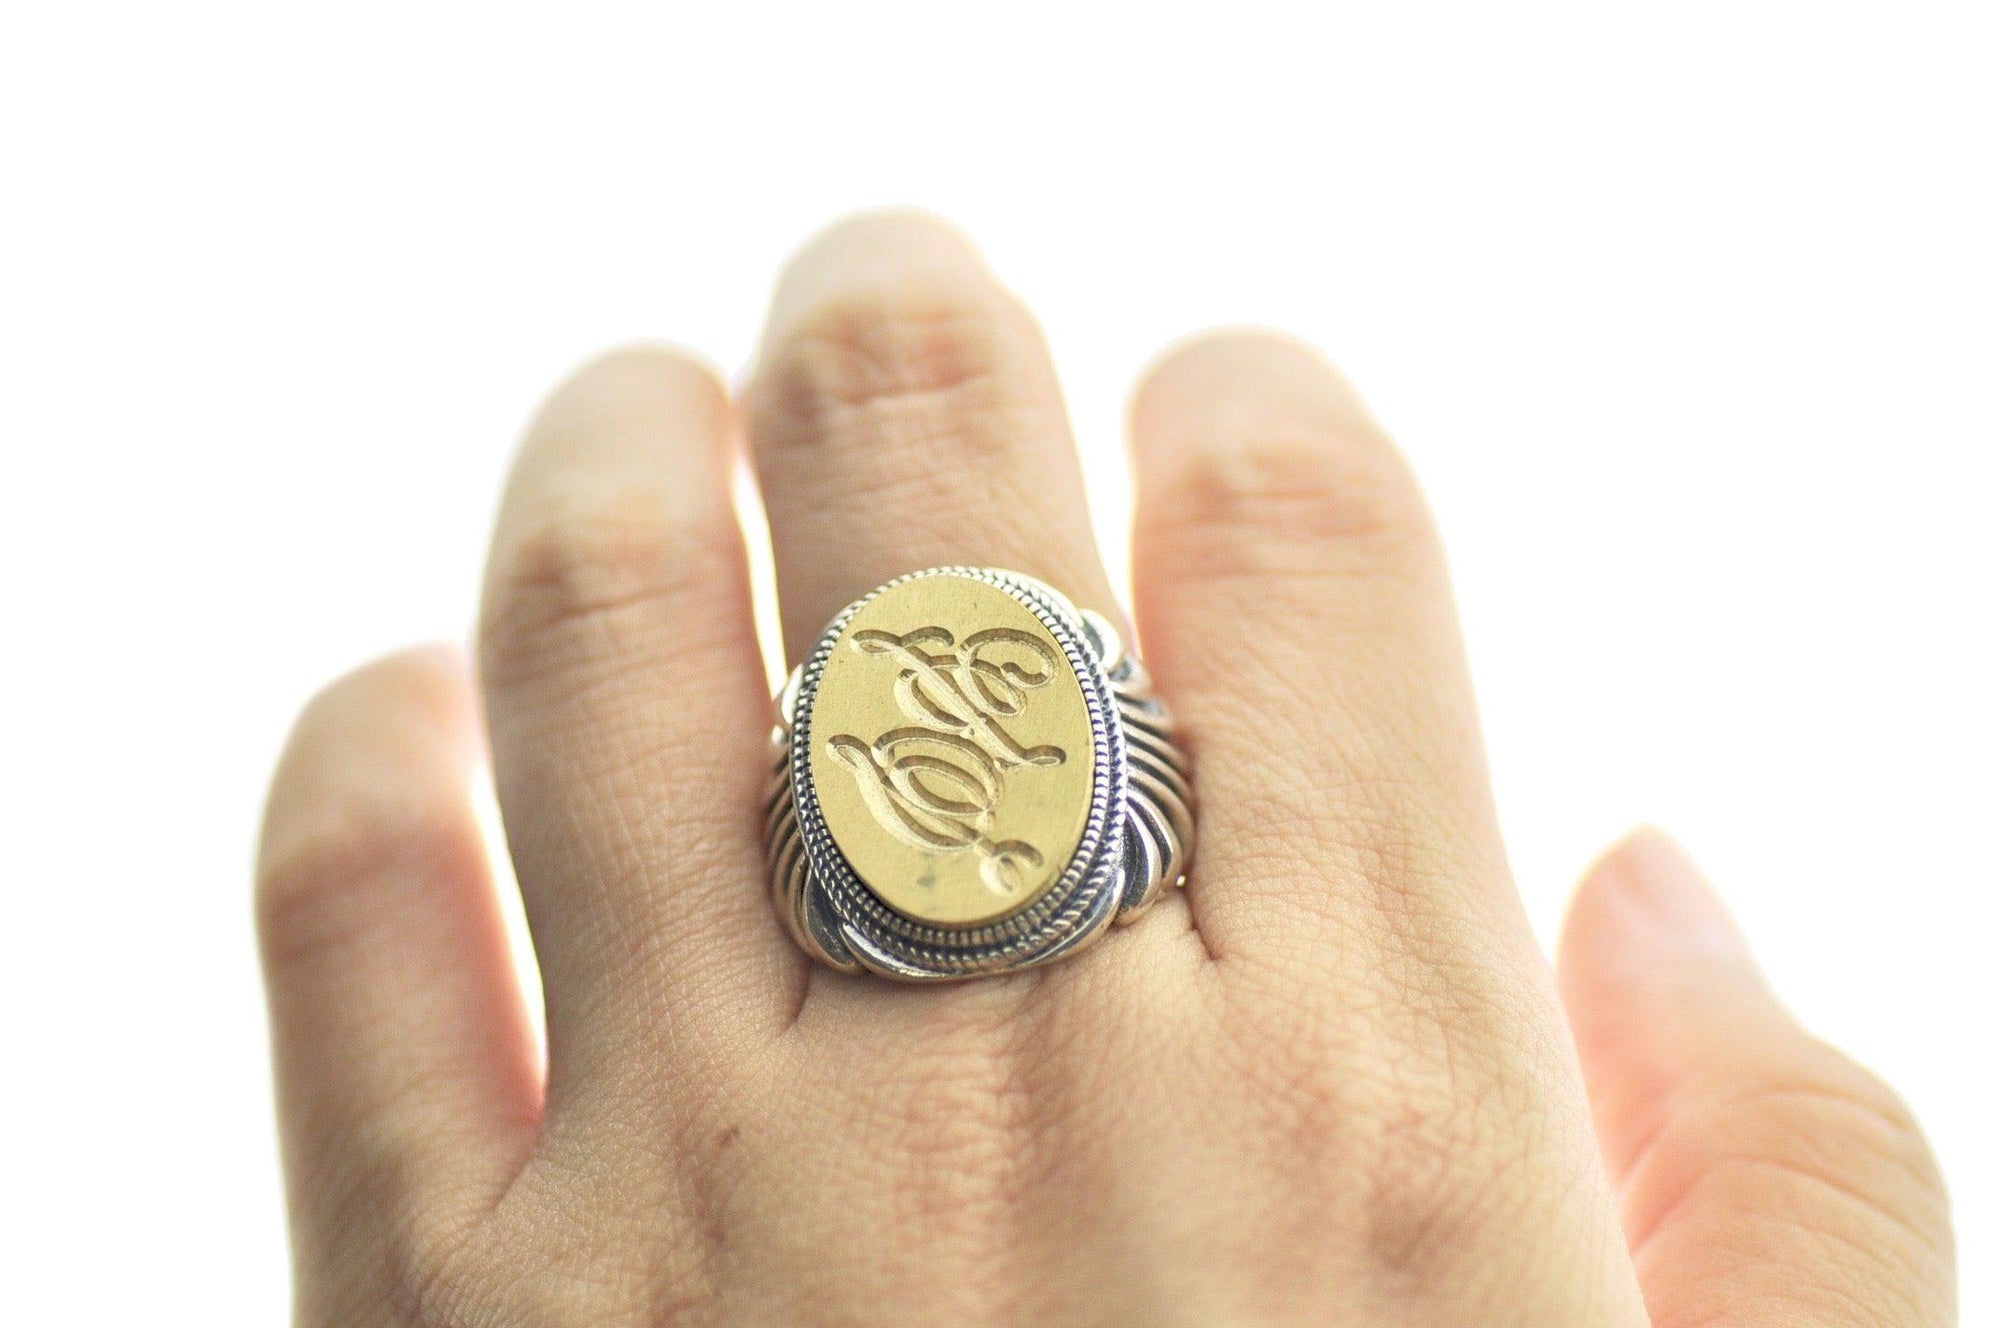 Calligraphy Double Initials Signet Ring - Backtozero B20 - 1520fan, 15x20mm, 2 initials, 2initials_no_and, accessory, bespoke, Custom, custom ring, Double Initials, him, initial ring, jewelry, Monogram, oval, oval ring, Personalized, ring, signet ring, size 10, size 11, size 8, size 9, Two initials, wax seal, wax seal ring